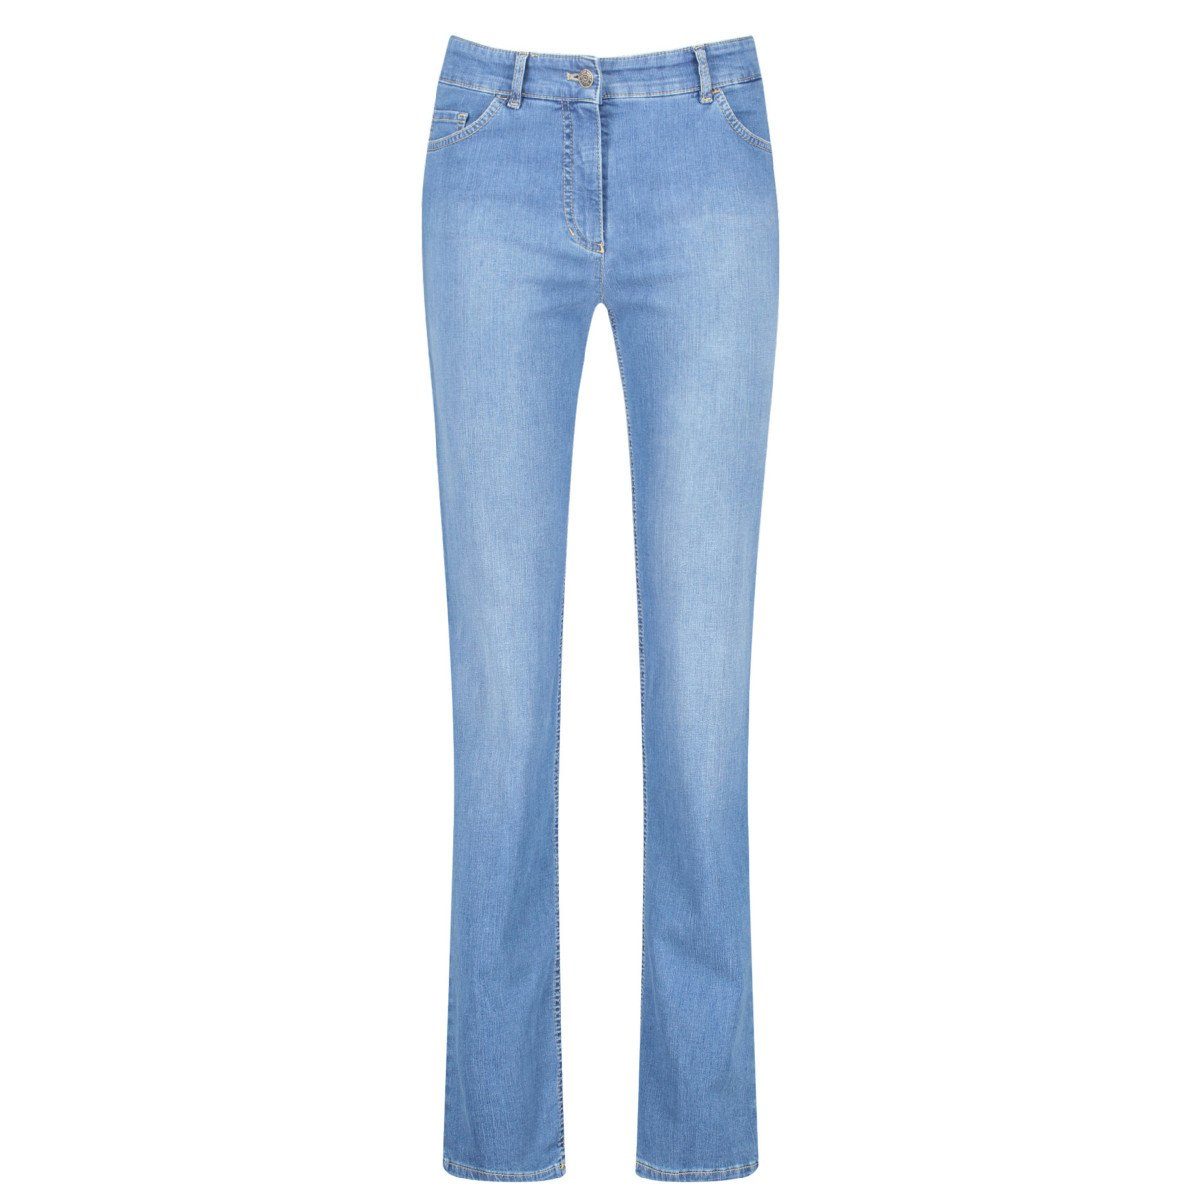 GERRY WEBER 5-Pocket-Jeans »Romy Straight Fit 92307-67840« STRAIGHT FIT  online kaufen | OTTO